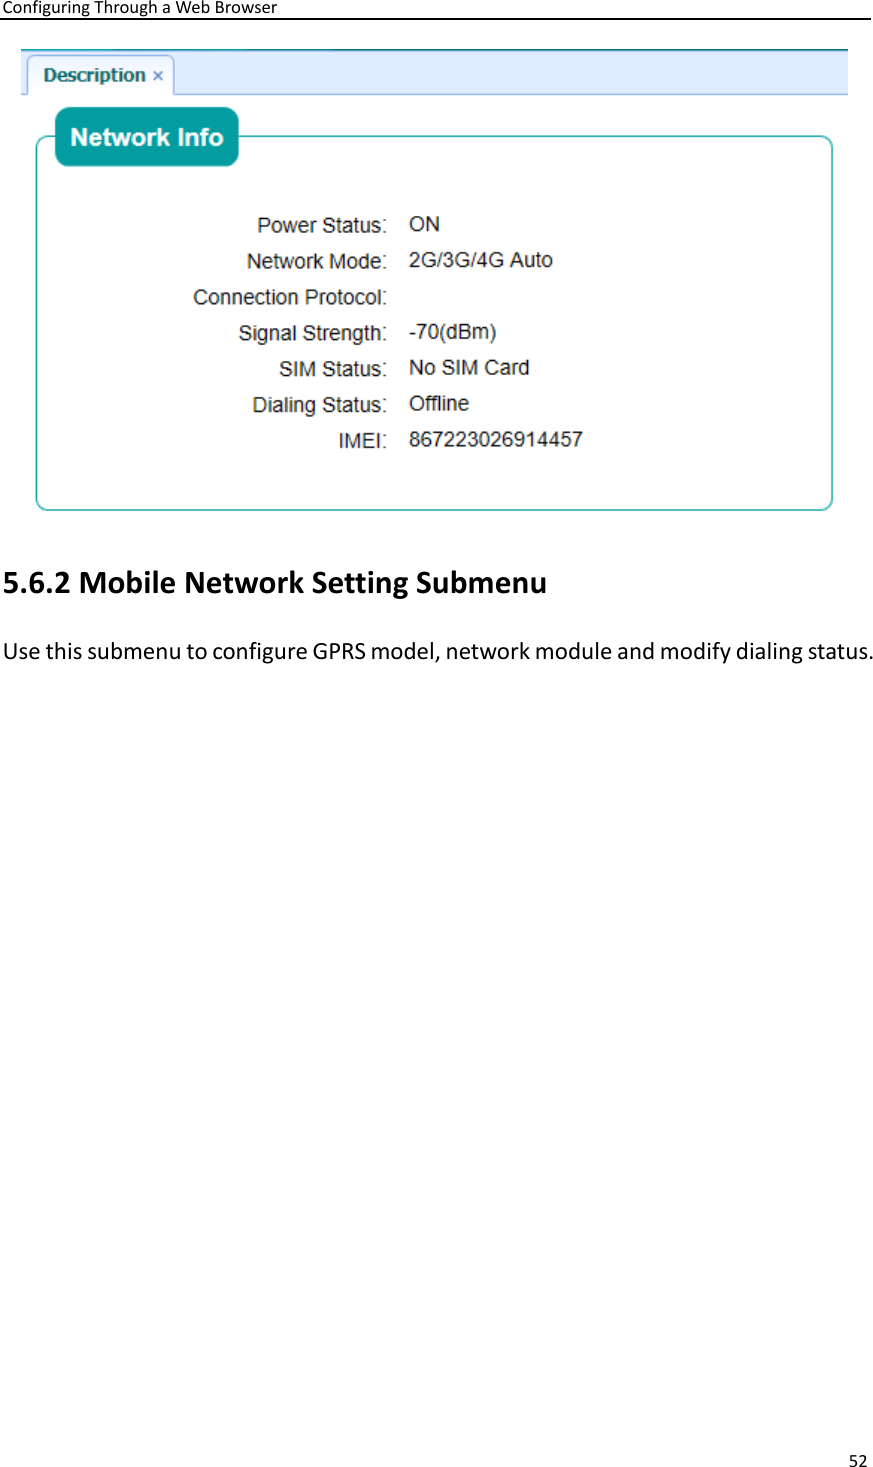 Configuring Through a Web Browser 52   5.6.2 Mobile Network Setting Submenu Use this submenu to configure GPRS model, network module and modify dialing status. 